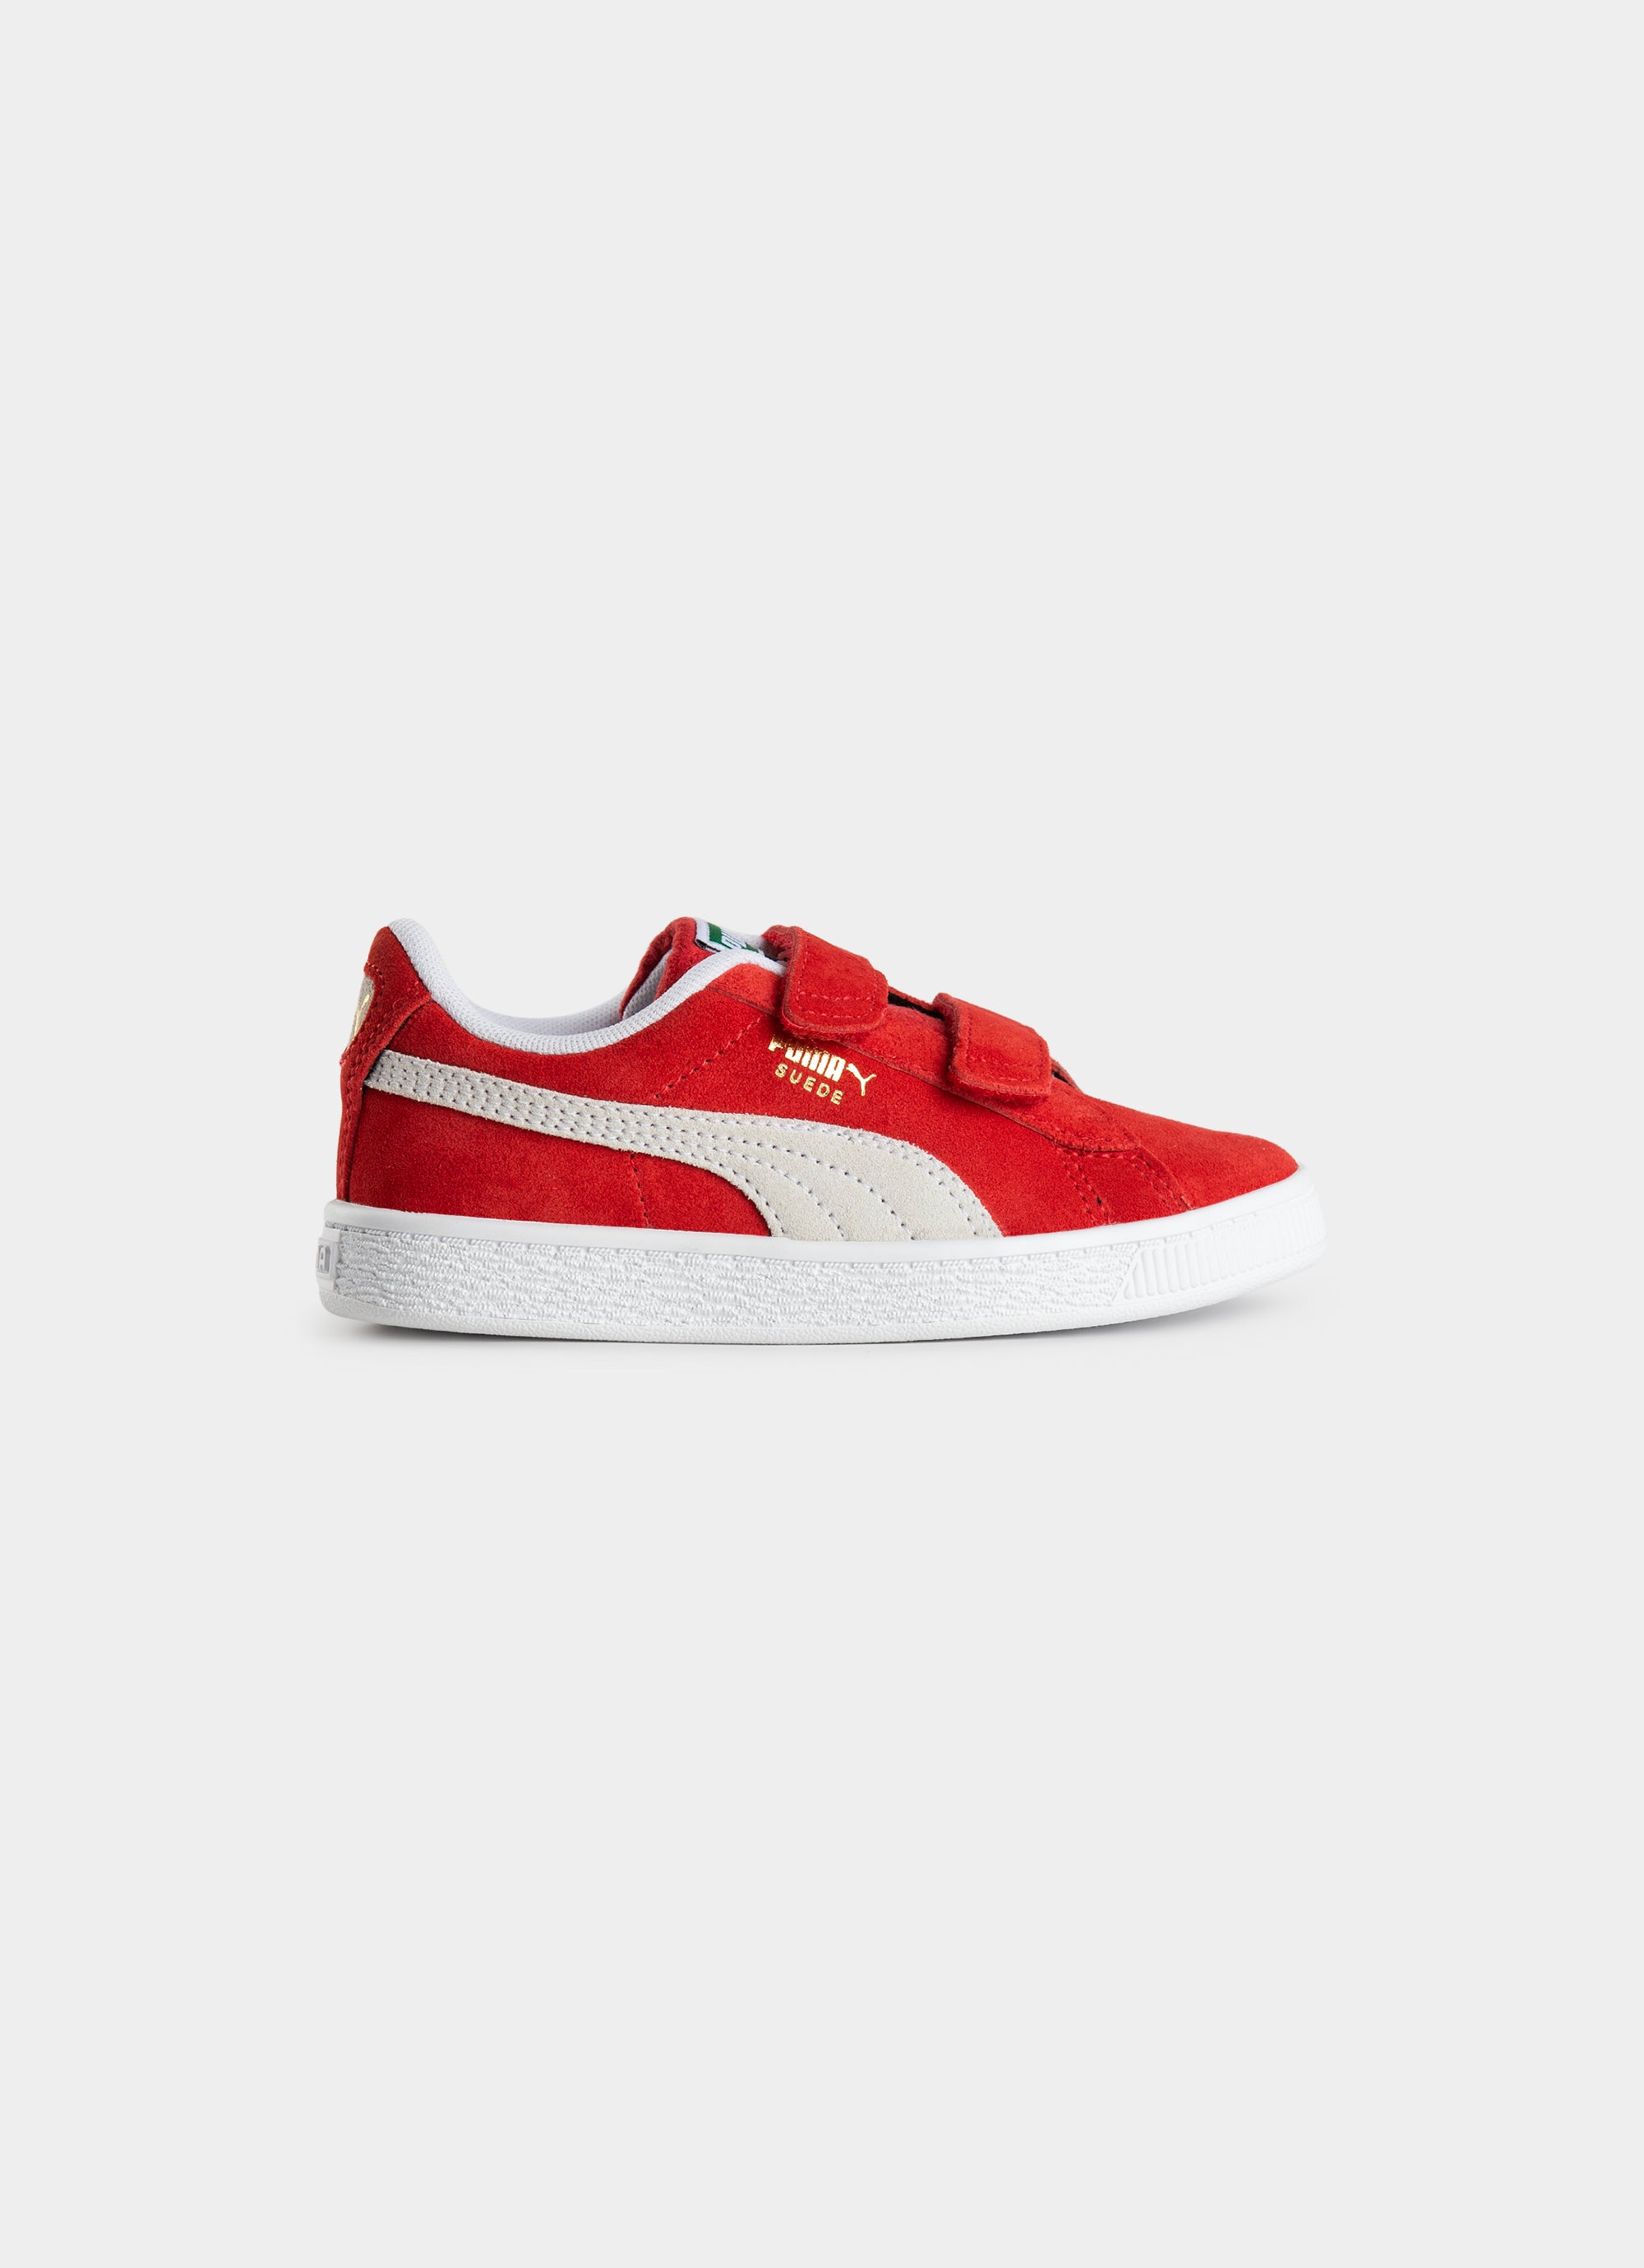 PUMA Suede Juniors High Risk Red/White Sneakers 35511003 